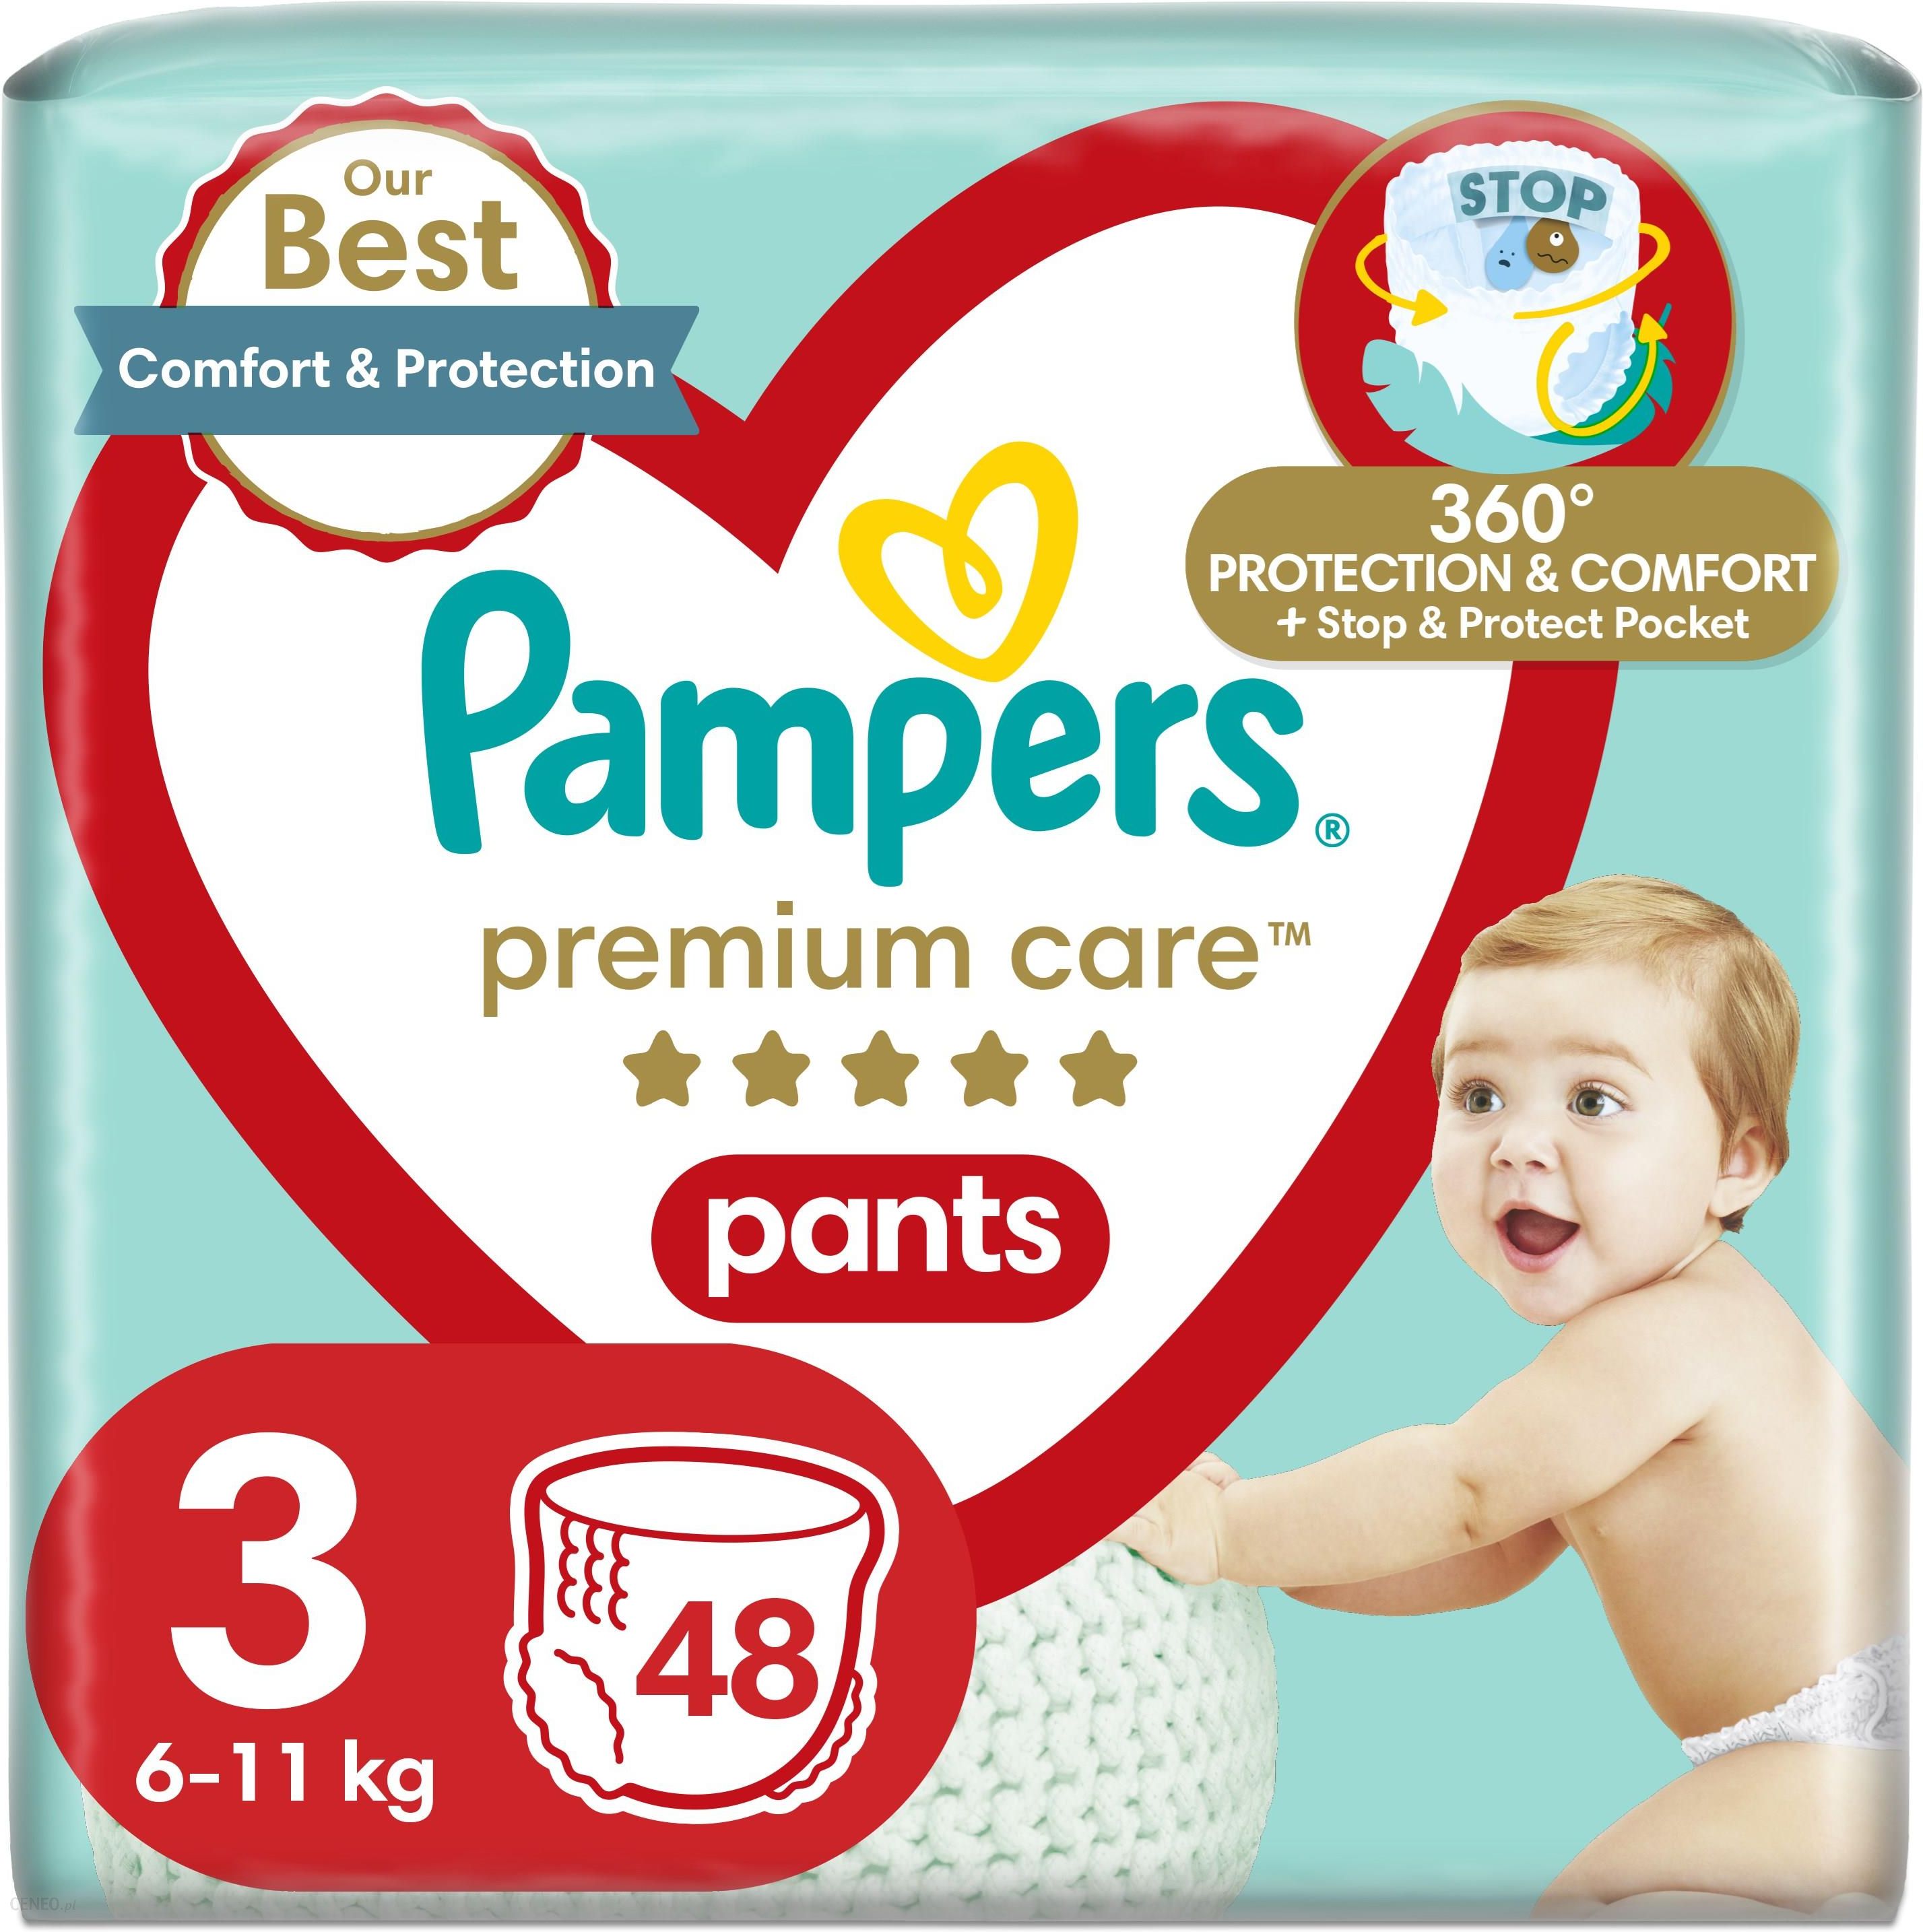 pampers pureprotection